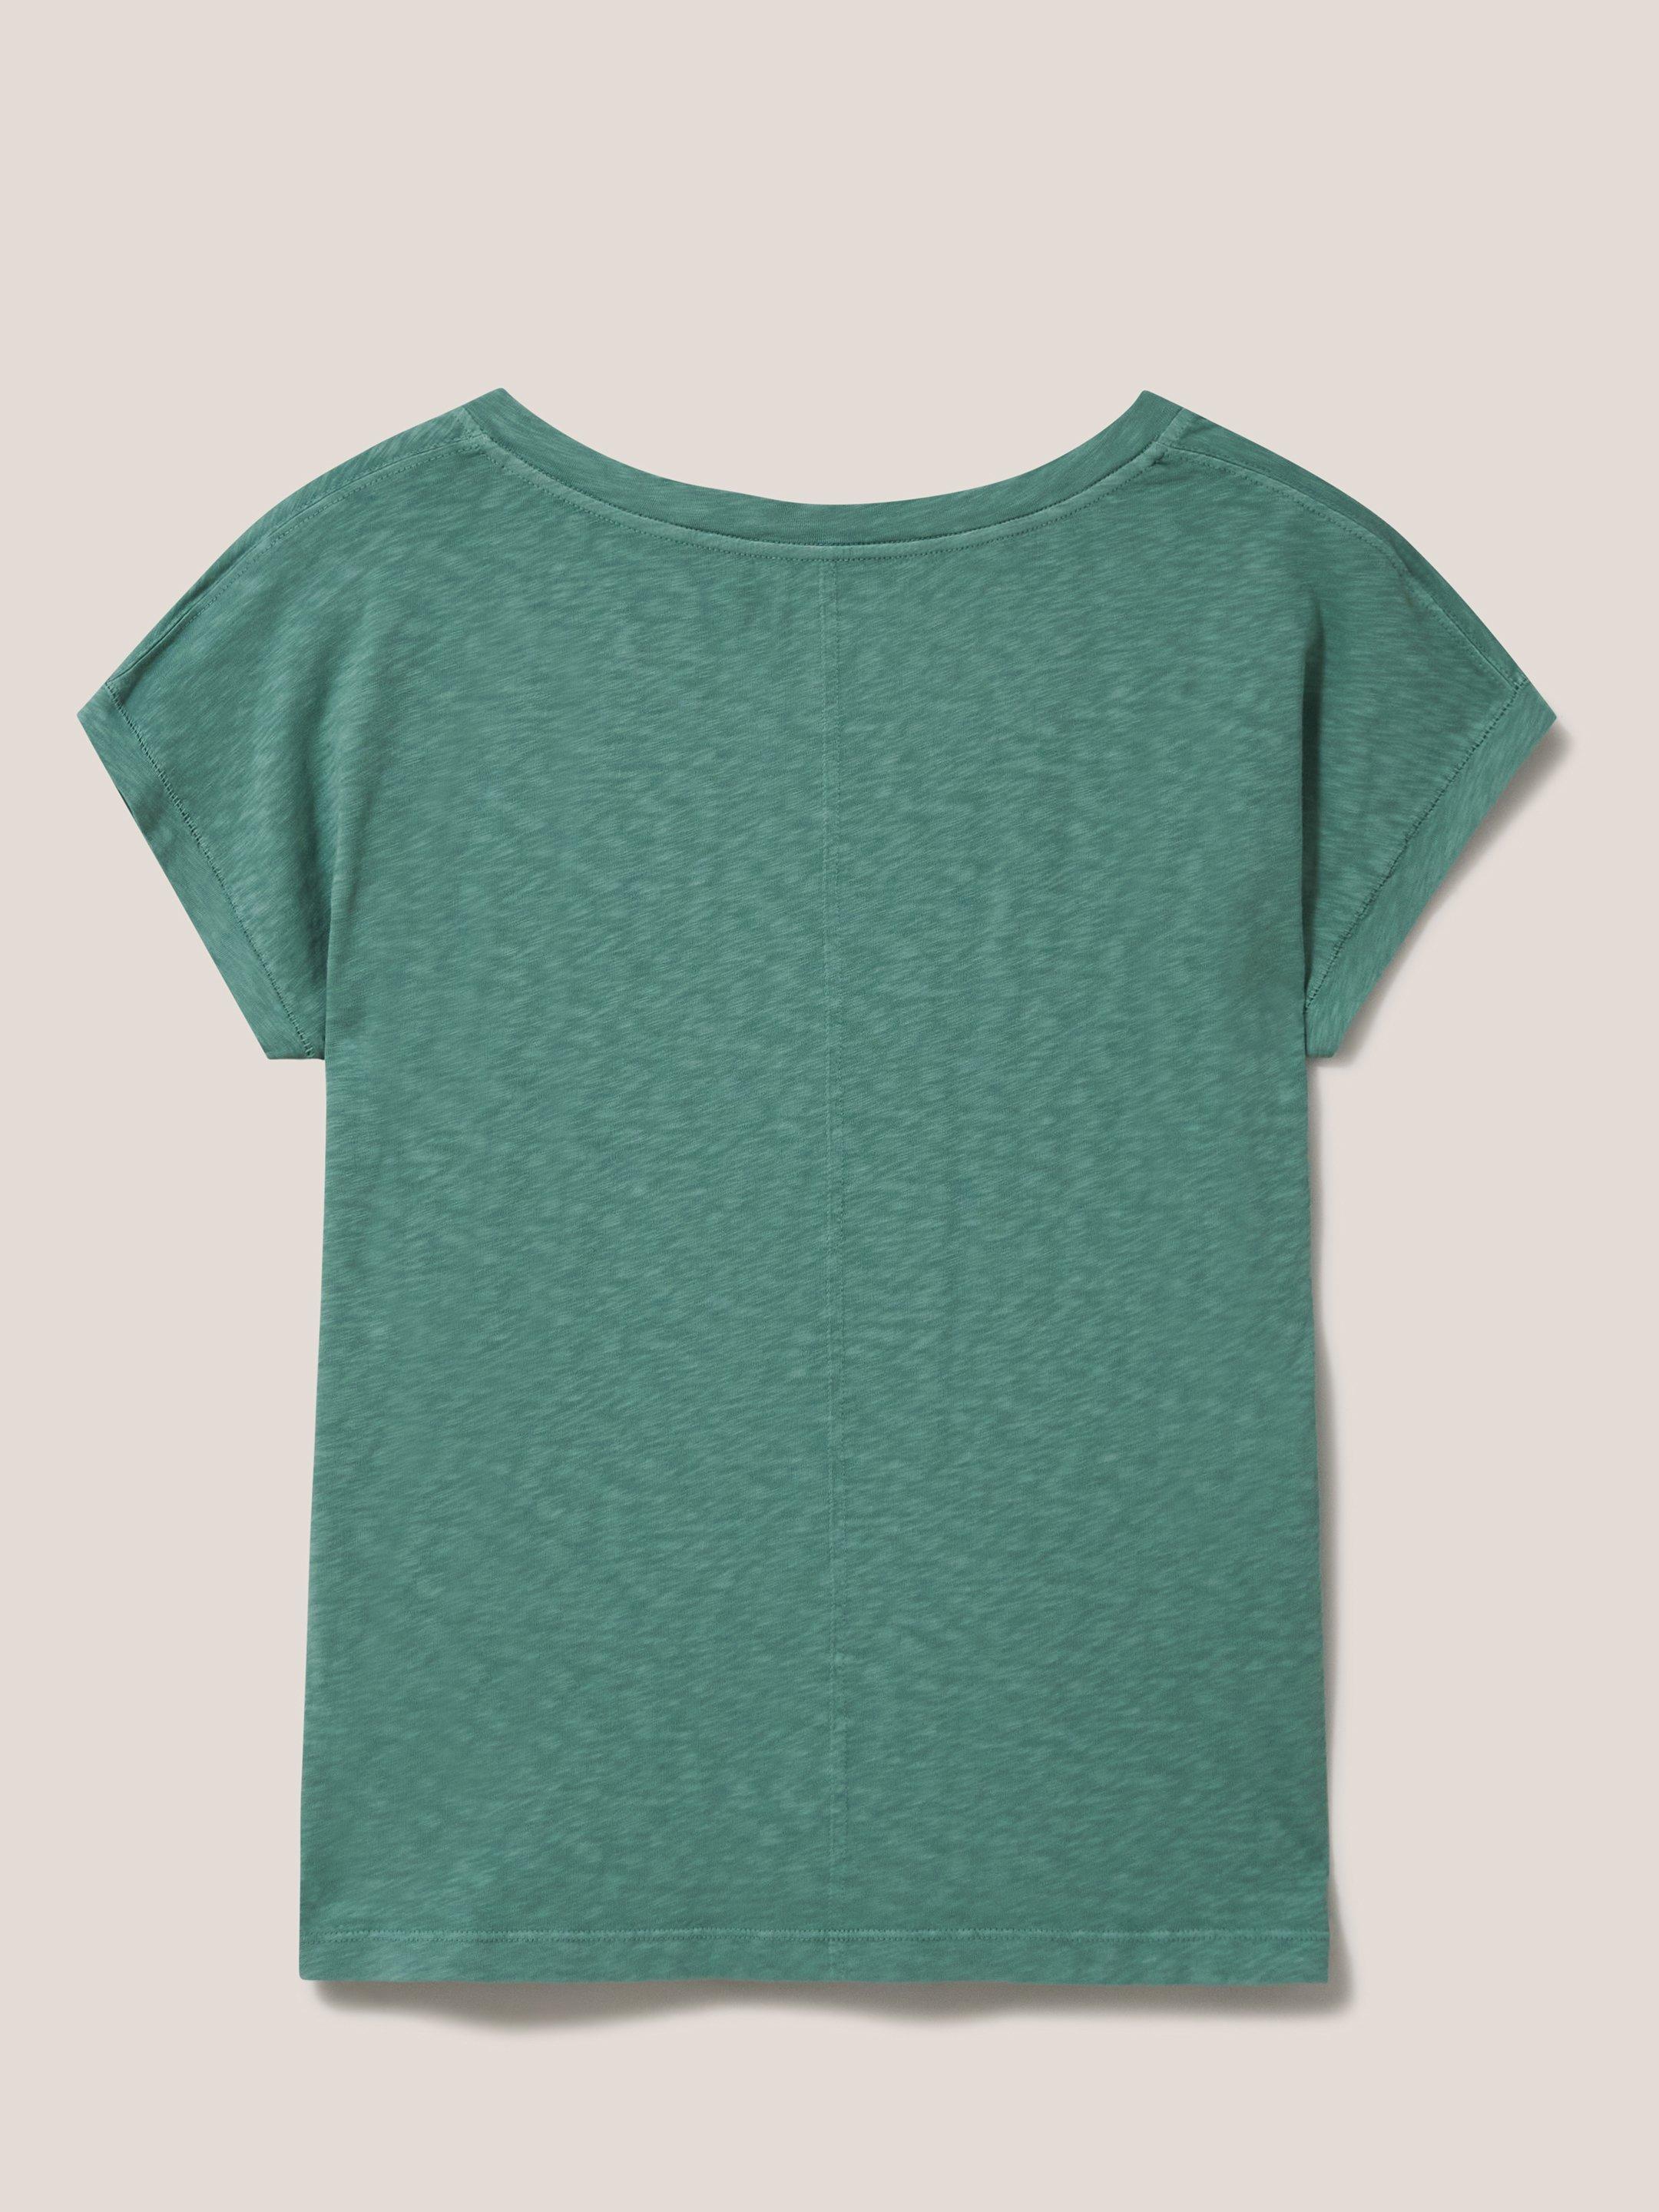 NELLY TEE in DK TEAL - FLAT BACK